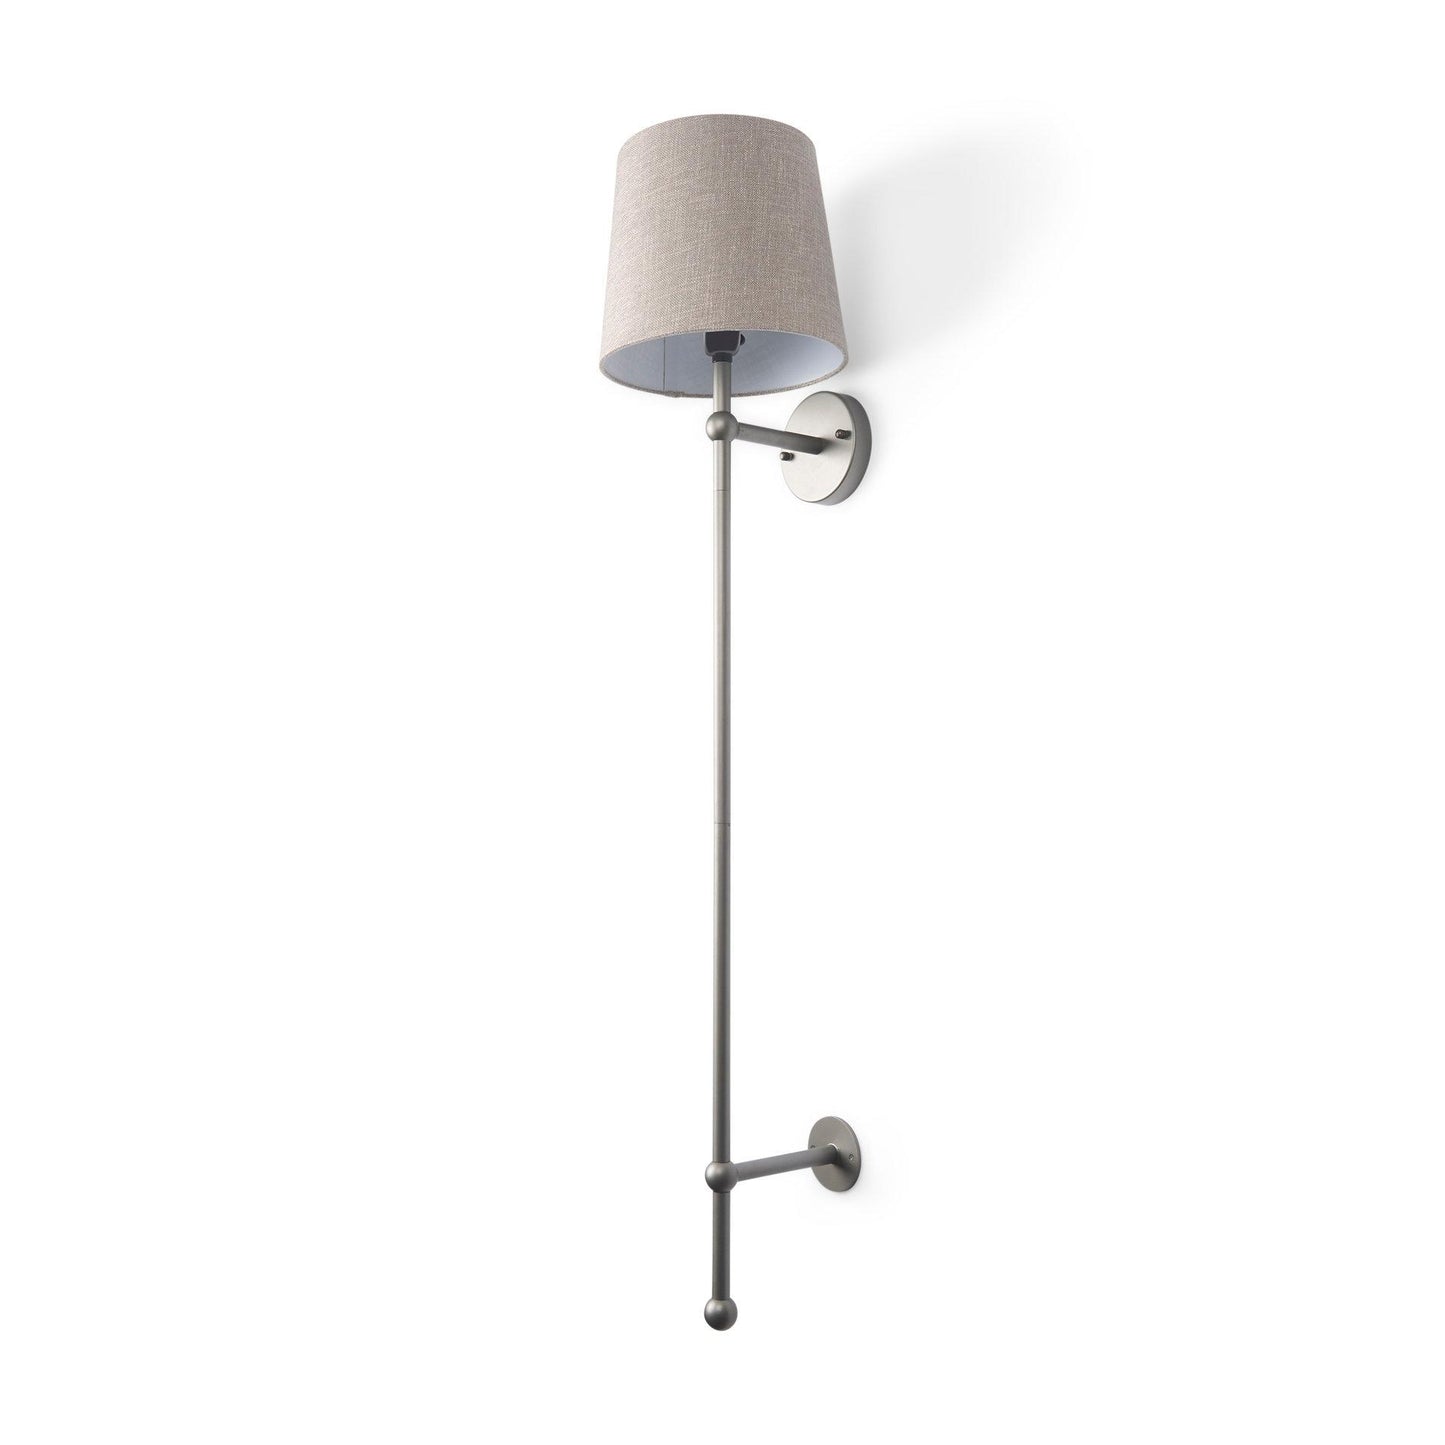 Chester 10 x 47 Gray Metal and Beige Fabric Shade Wall Sconce